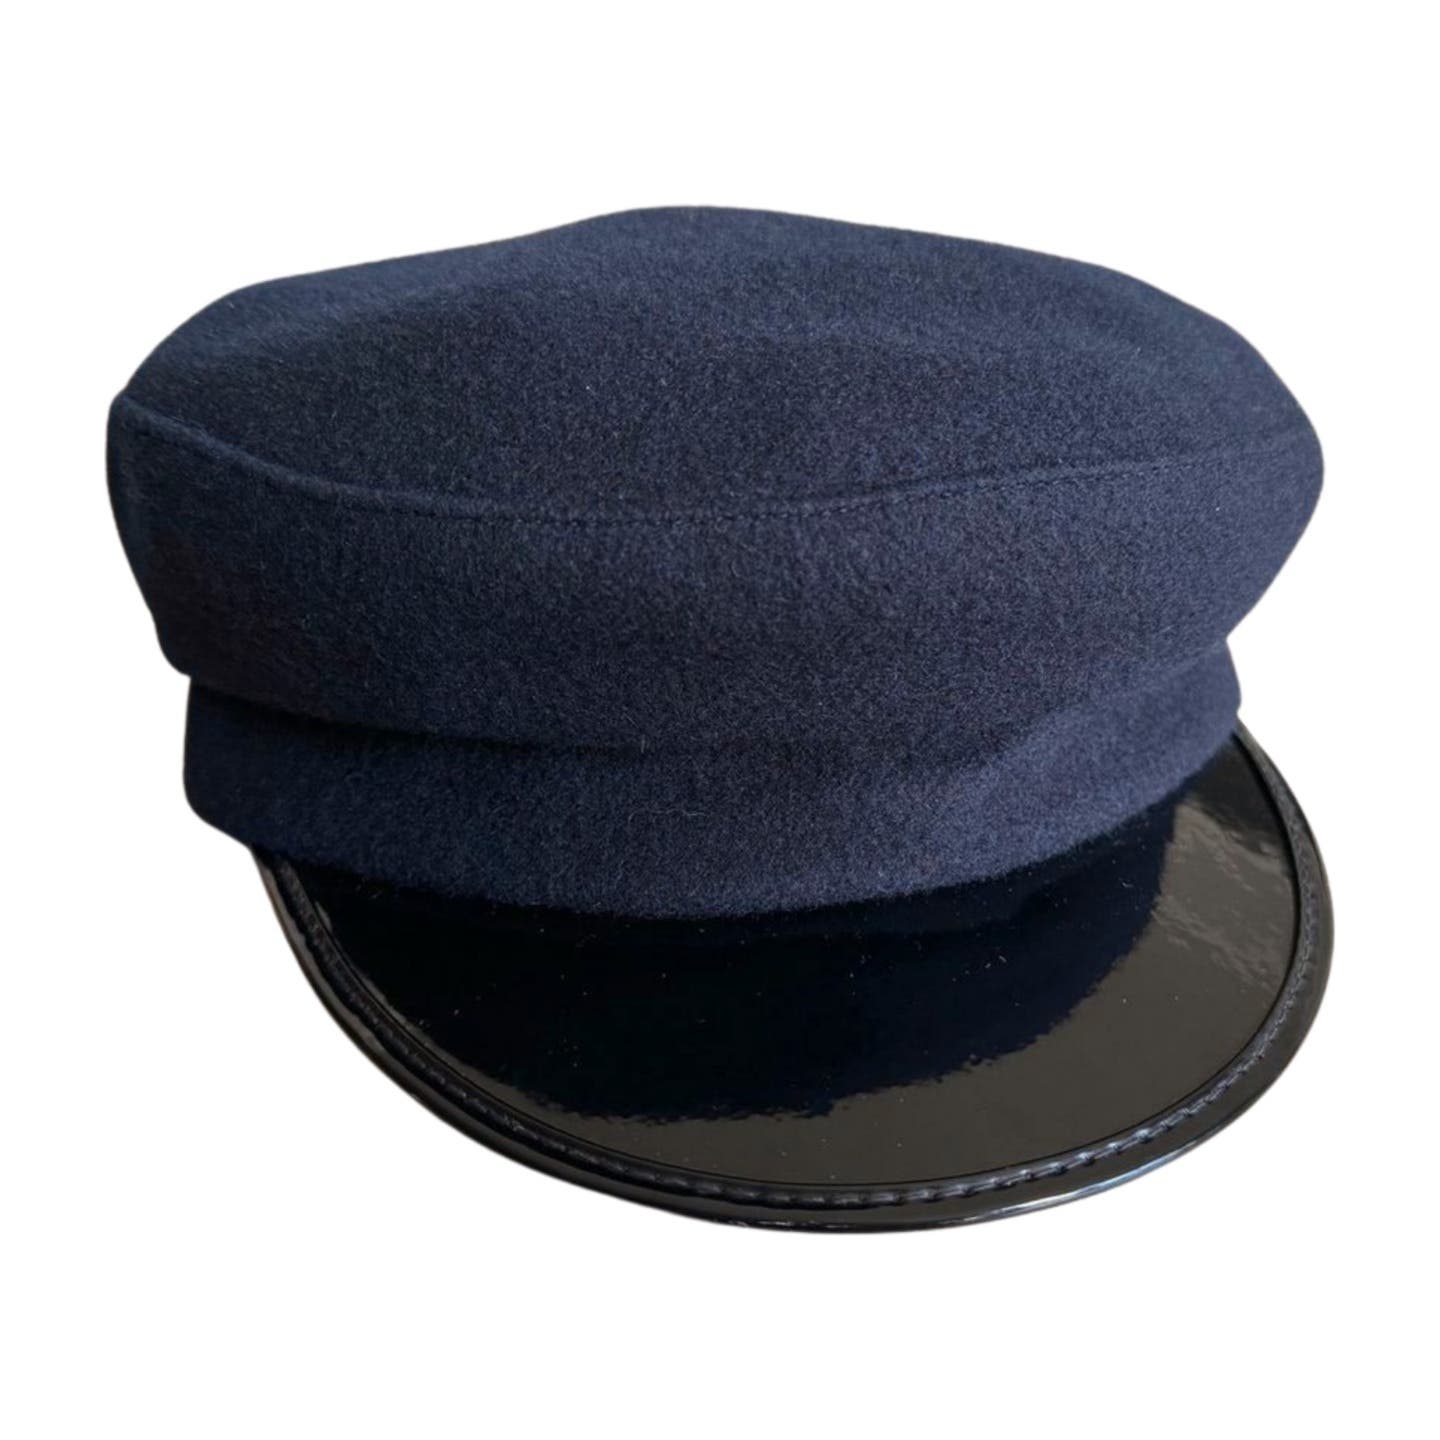 A Bloomingdale's Vintage Bloomingdale's Fishermen Hat in dark navy blue woolen fabric with a glossy black visor. The vintage hat has a simple, classic design without any additional decorations or logos, reminiscent of timeless styles found at Bloomingdale's.